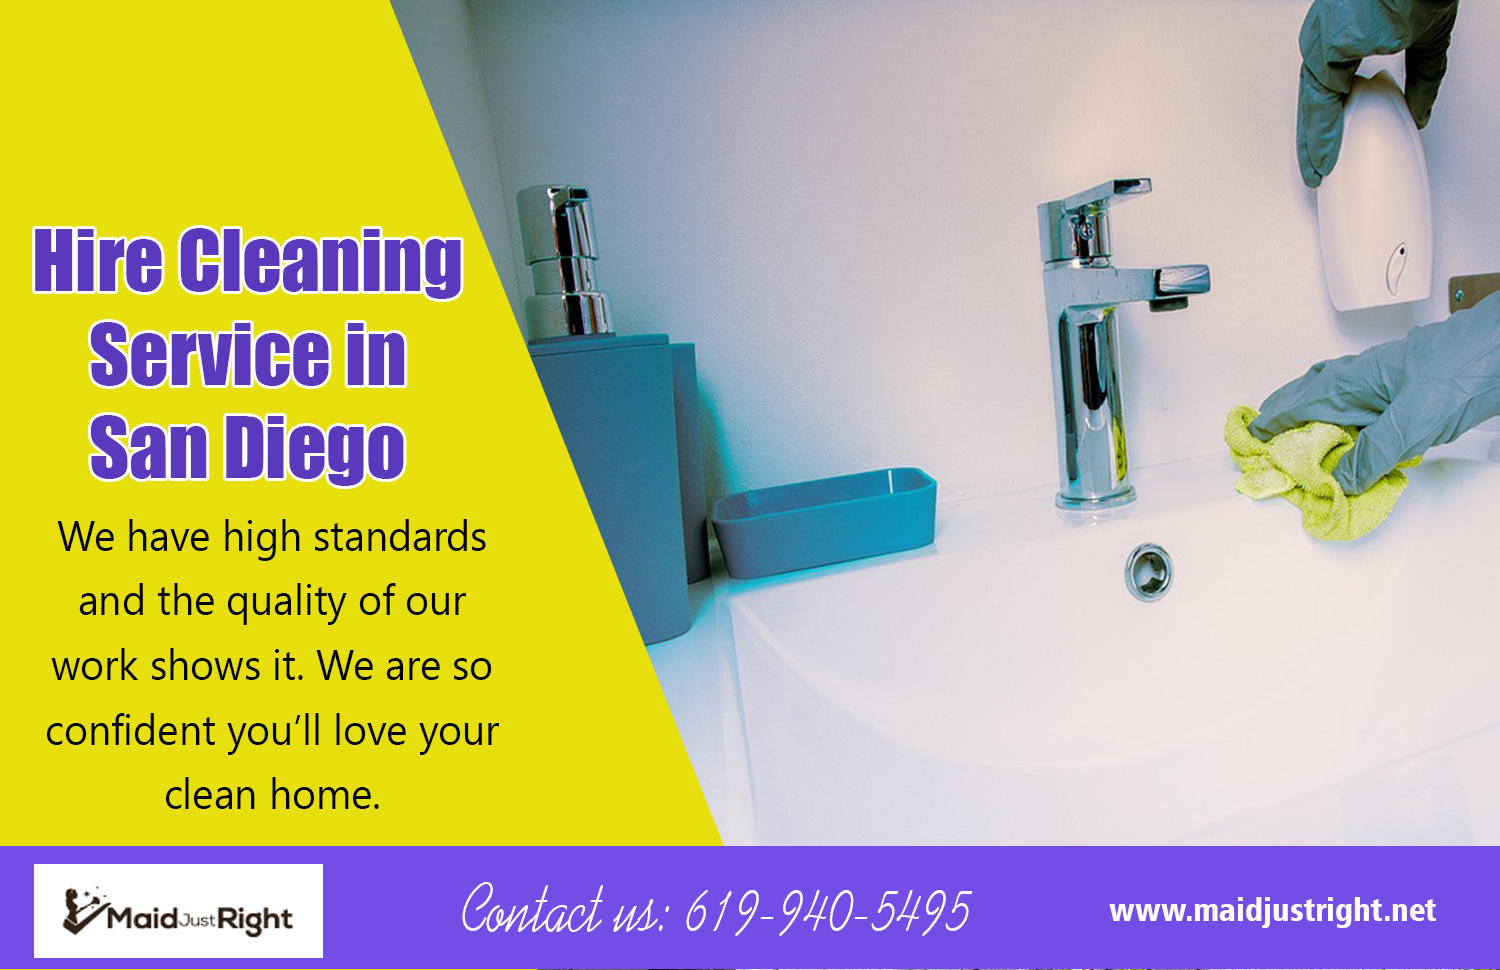 Hire Cleaning Service In San Diego | Call Us - 619-940-5495 | maidjustright.net